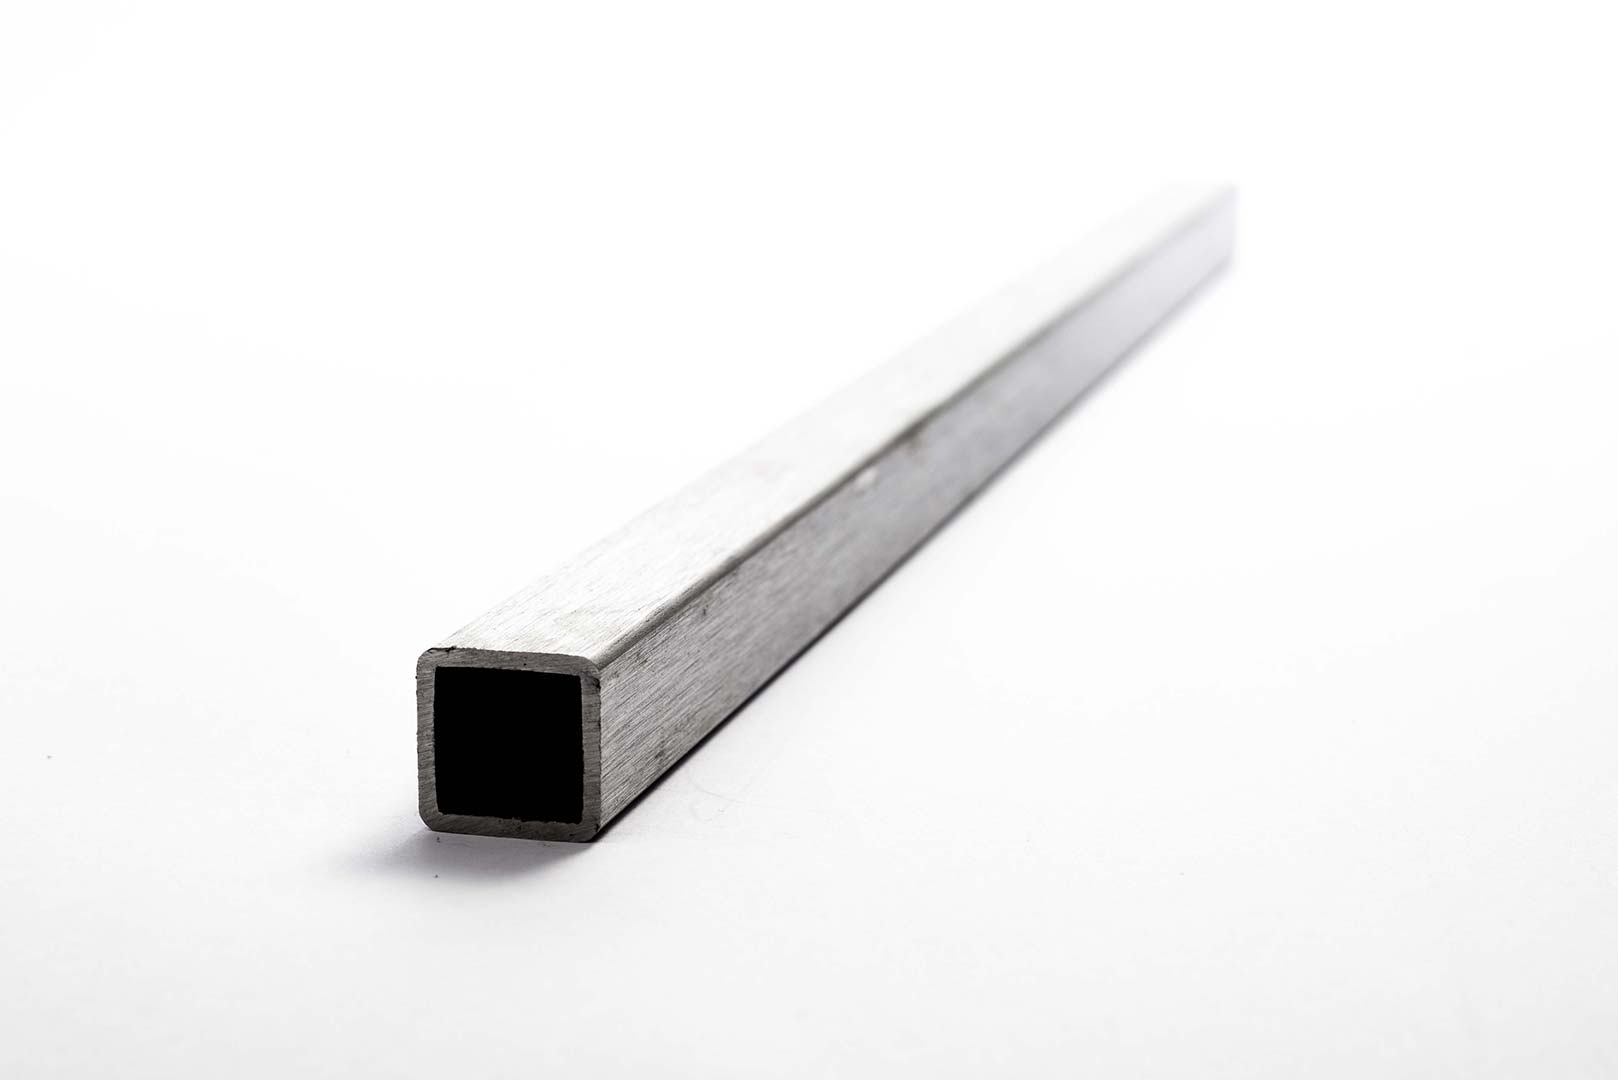 Stainless Steel 304 Square Tubing 12 Length 0.12 Wall 1 x 1 ASTM A554 